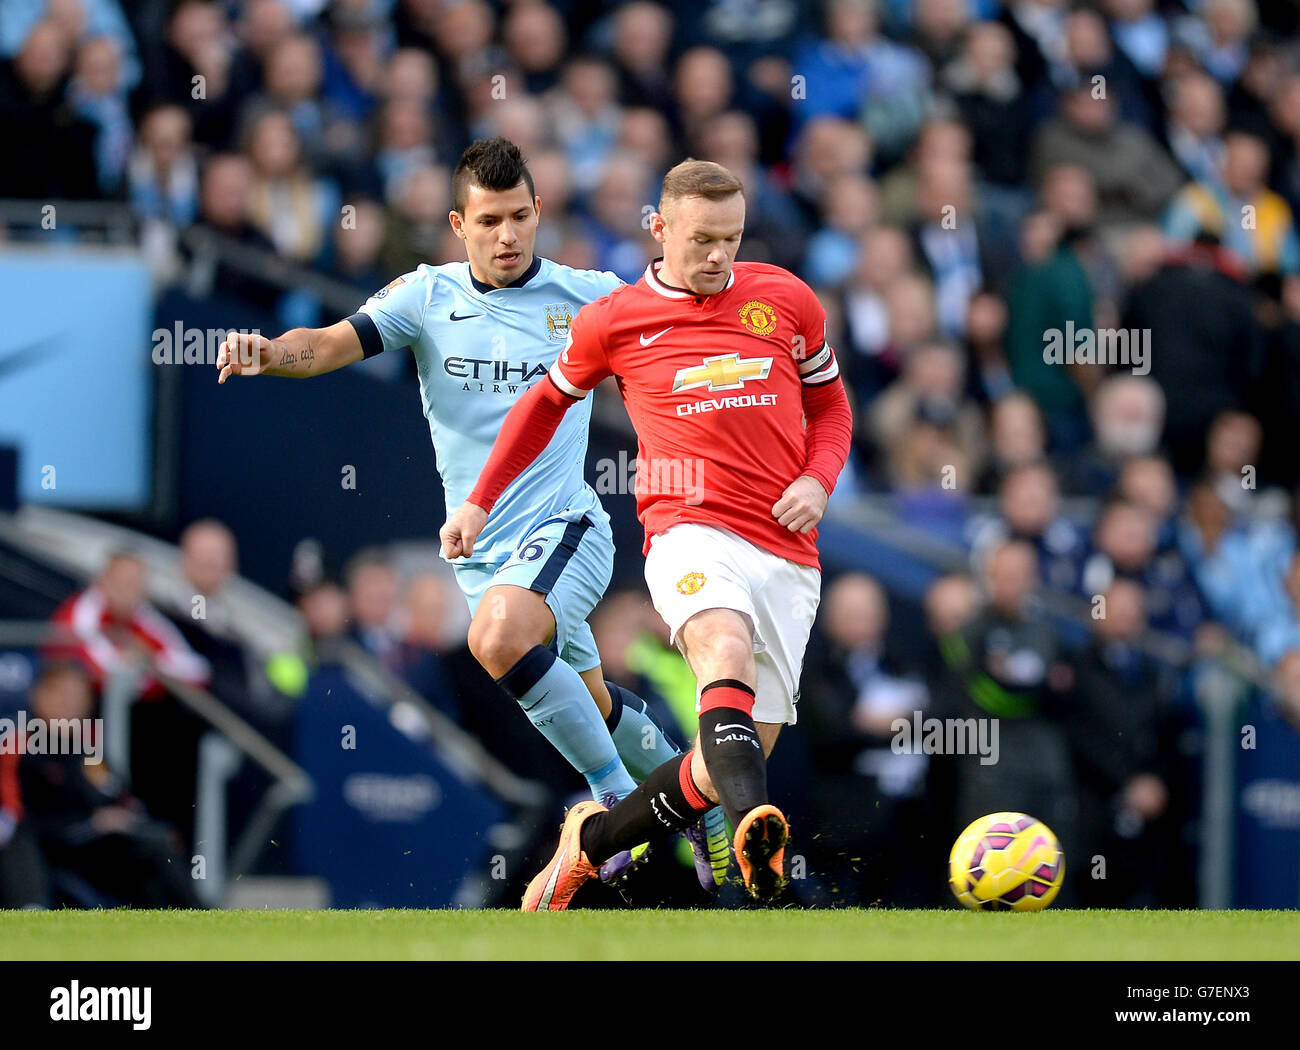 Manchester City's Sergio Aguero battles for the ball with Manchester United's Wayne Rooney (right) during the Barclays Premier League match at the Etihad Stadium, Manchester. PRESS ASSOCIATION Photo. Picture date: Sunday November 2nd, 2014. See PA story SOCCER Man City. Photo credit should read Martin Rickett/PA Wire. . . Stock Photo